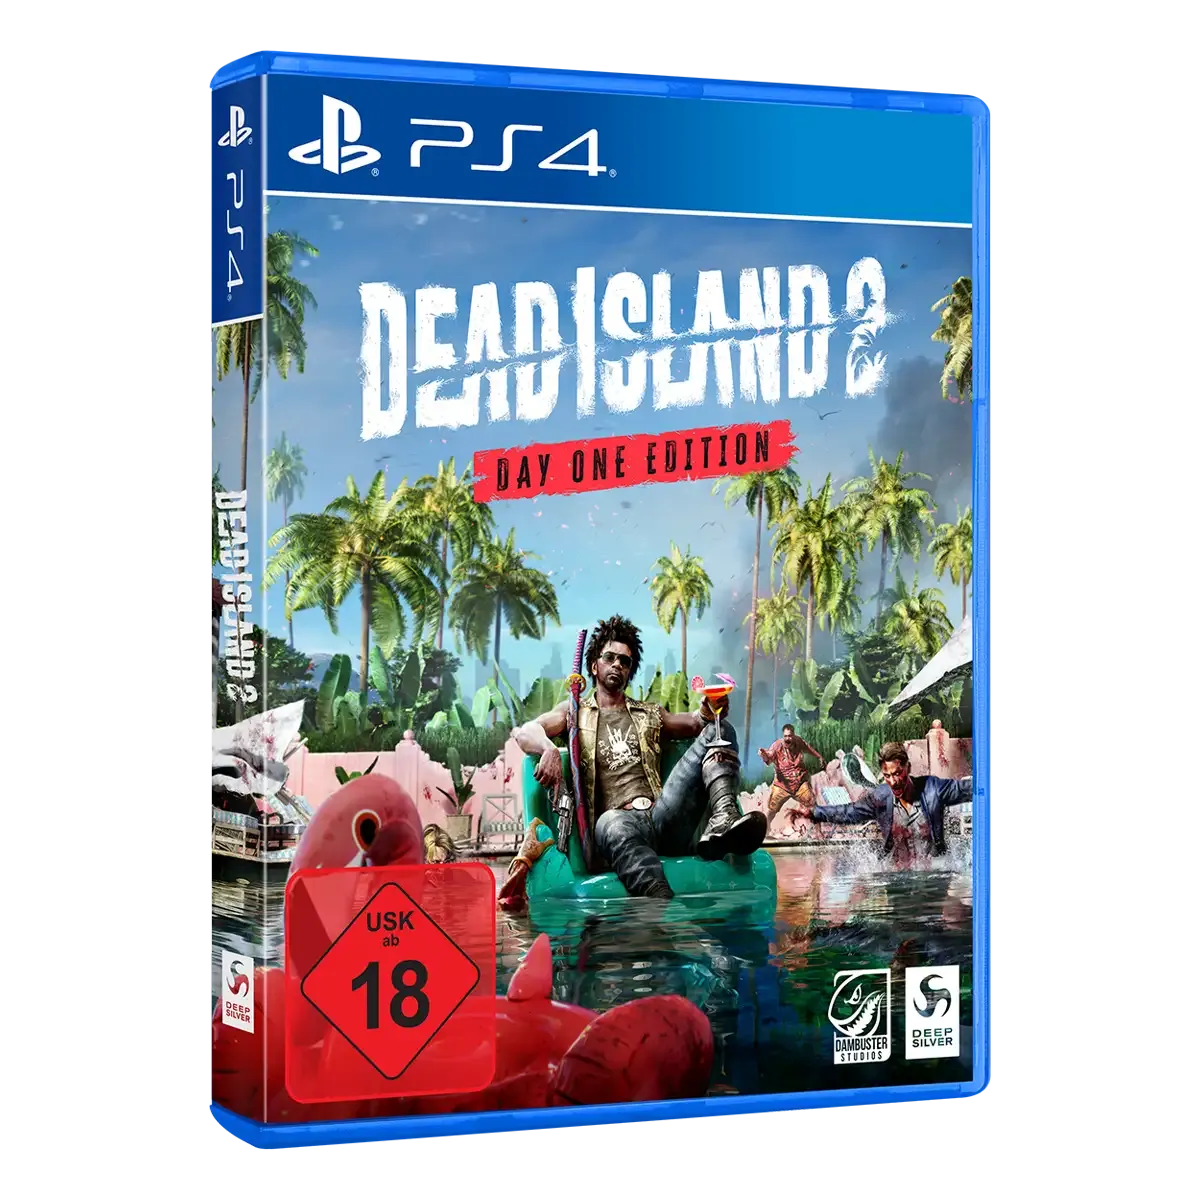 Dead Island 2 Day One Edition - PS4 (USK) | PS4 | GAMES